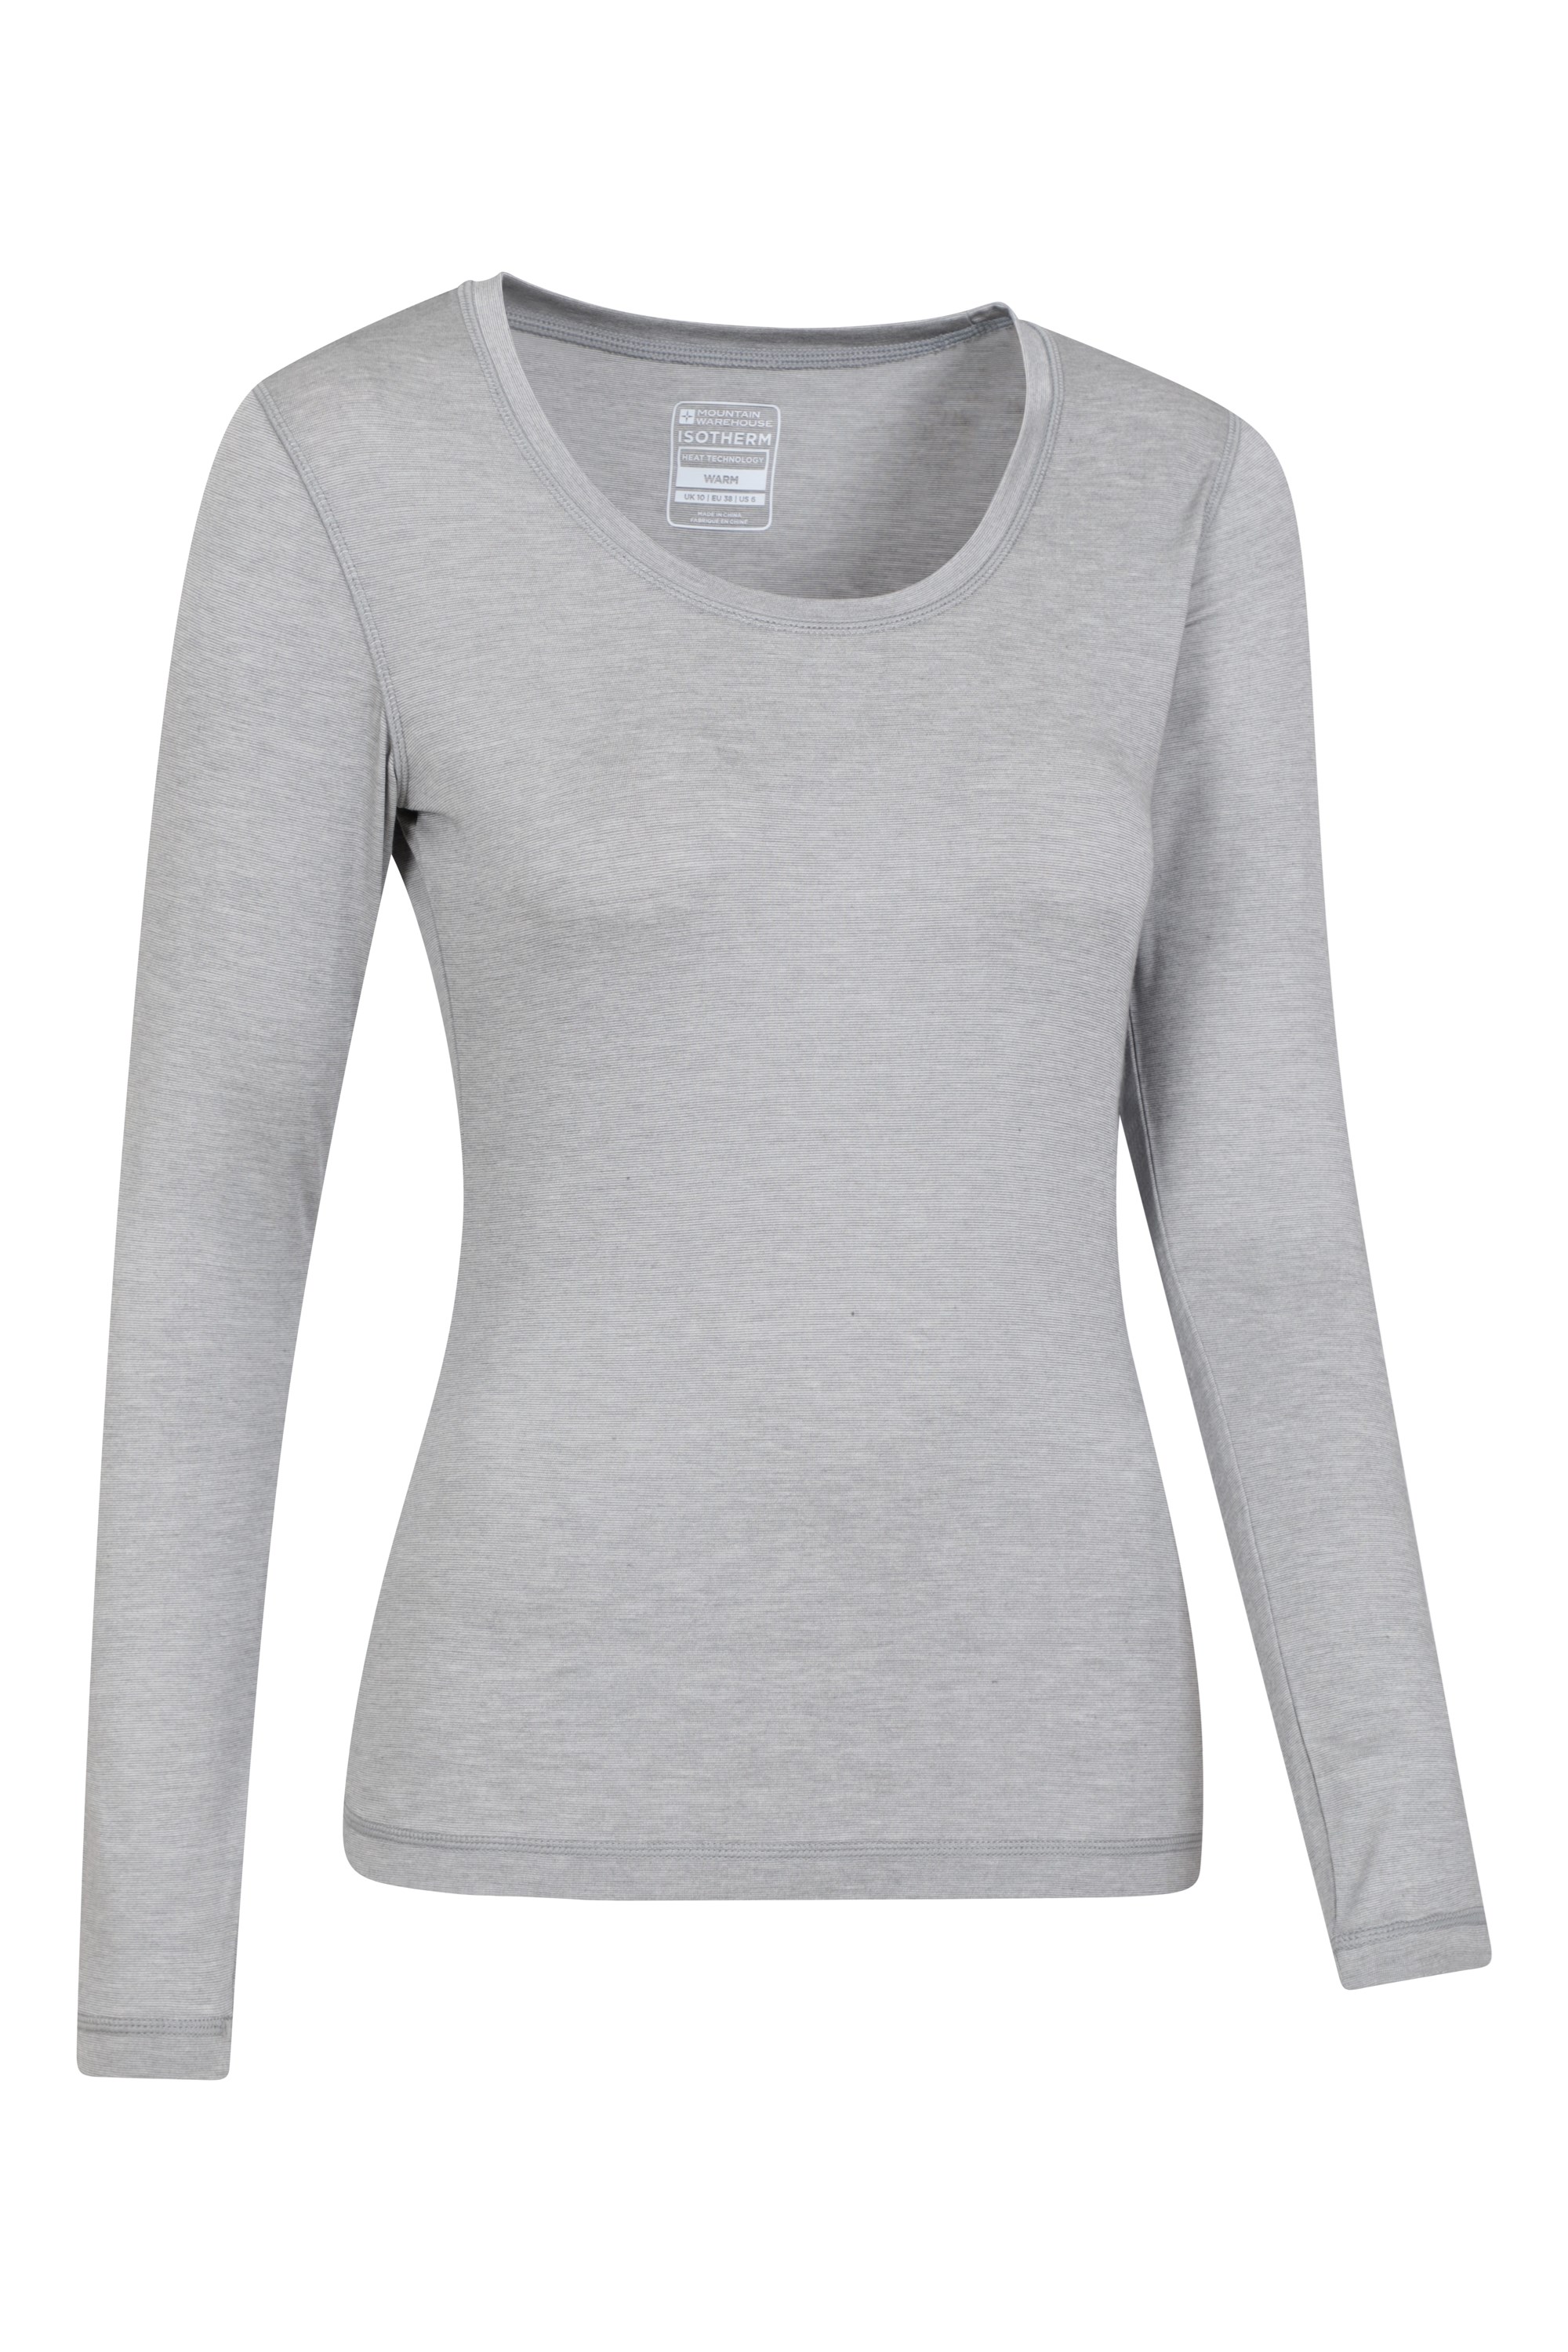 Waves Of Warmth Brushed - Technical Long Sleeve Thermal Top for Women